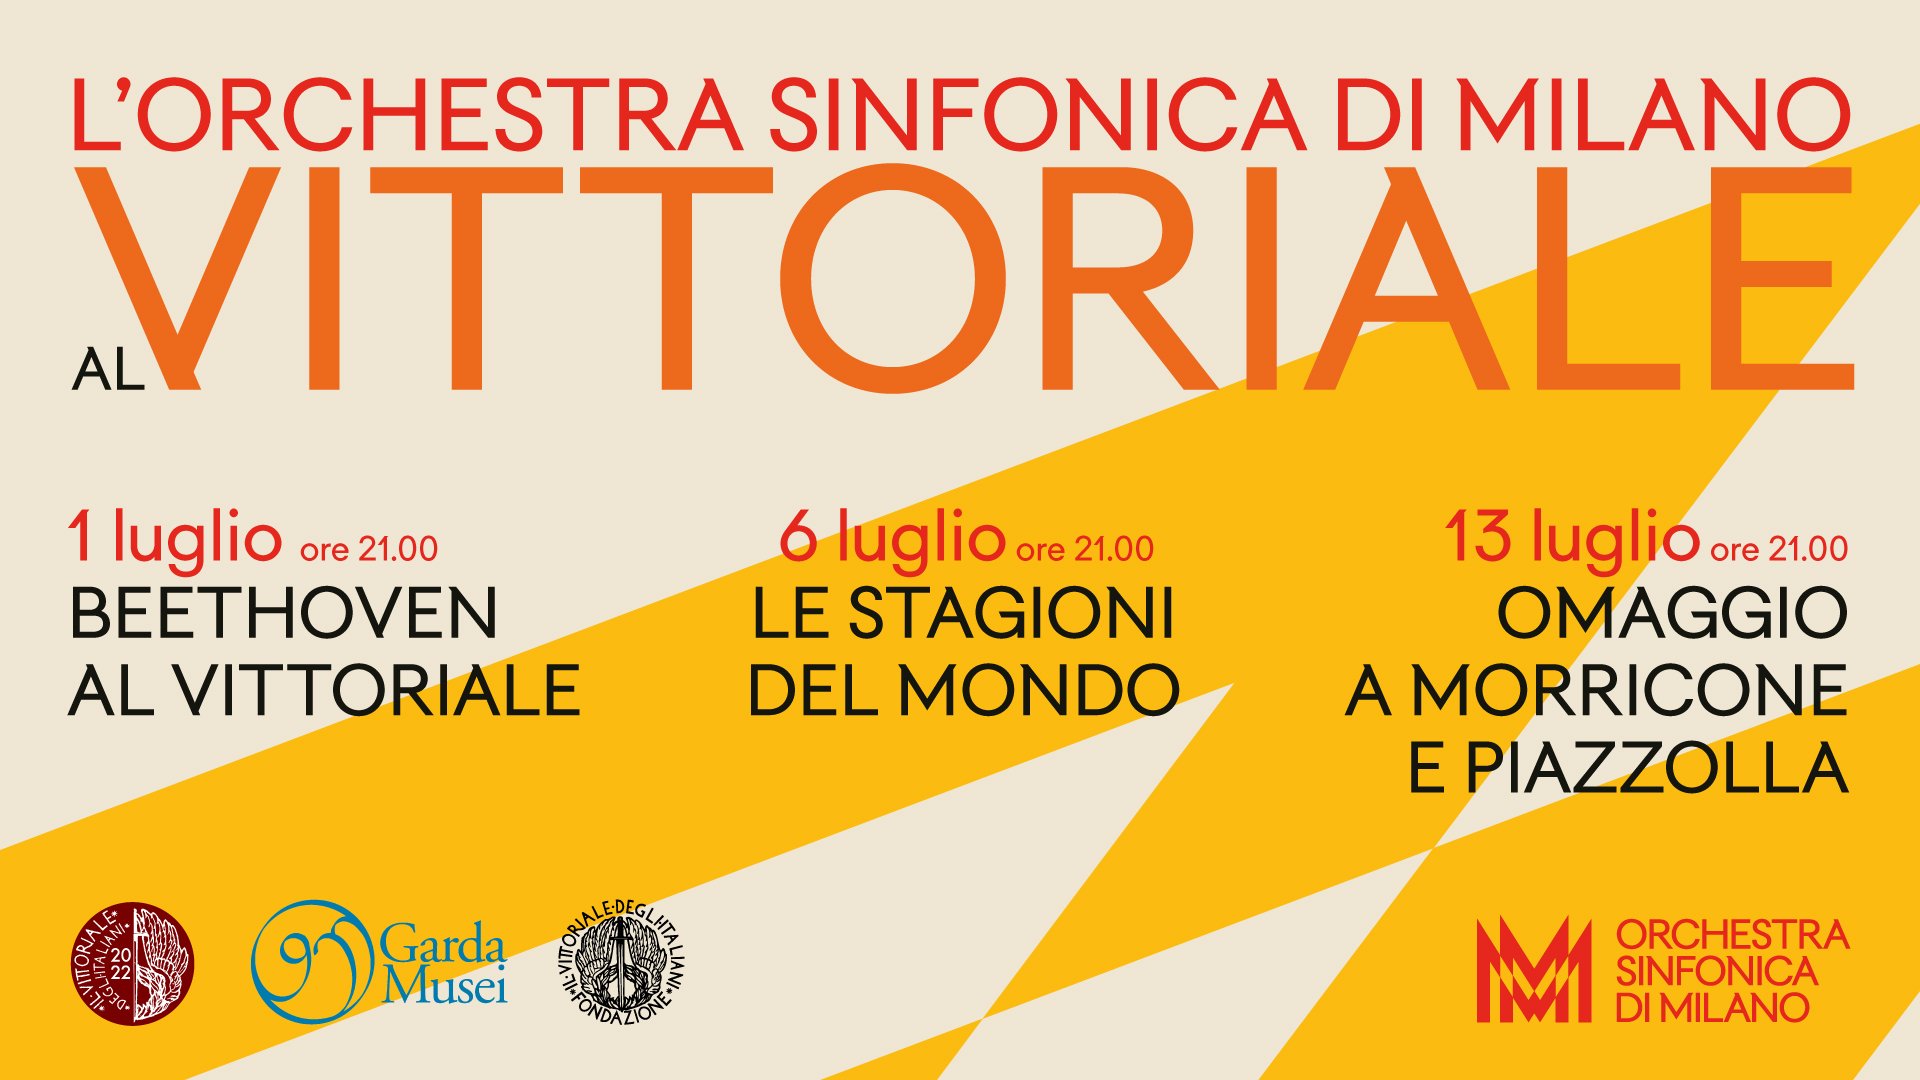 Banner and brand identity for Orchestra Sinfonica di Milano designed by Landor & Fitch 